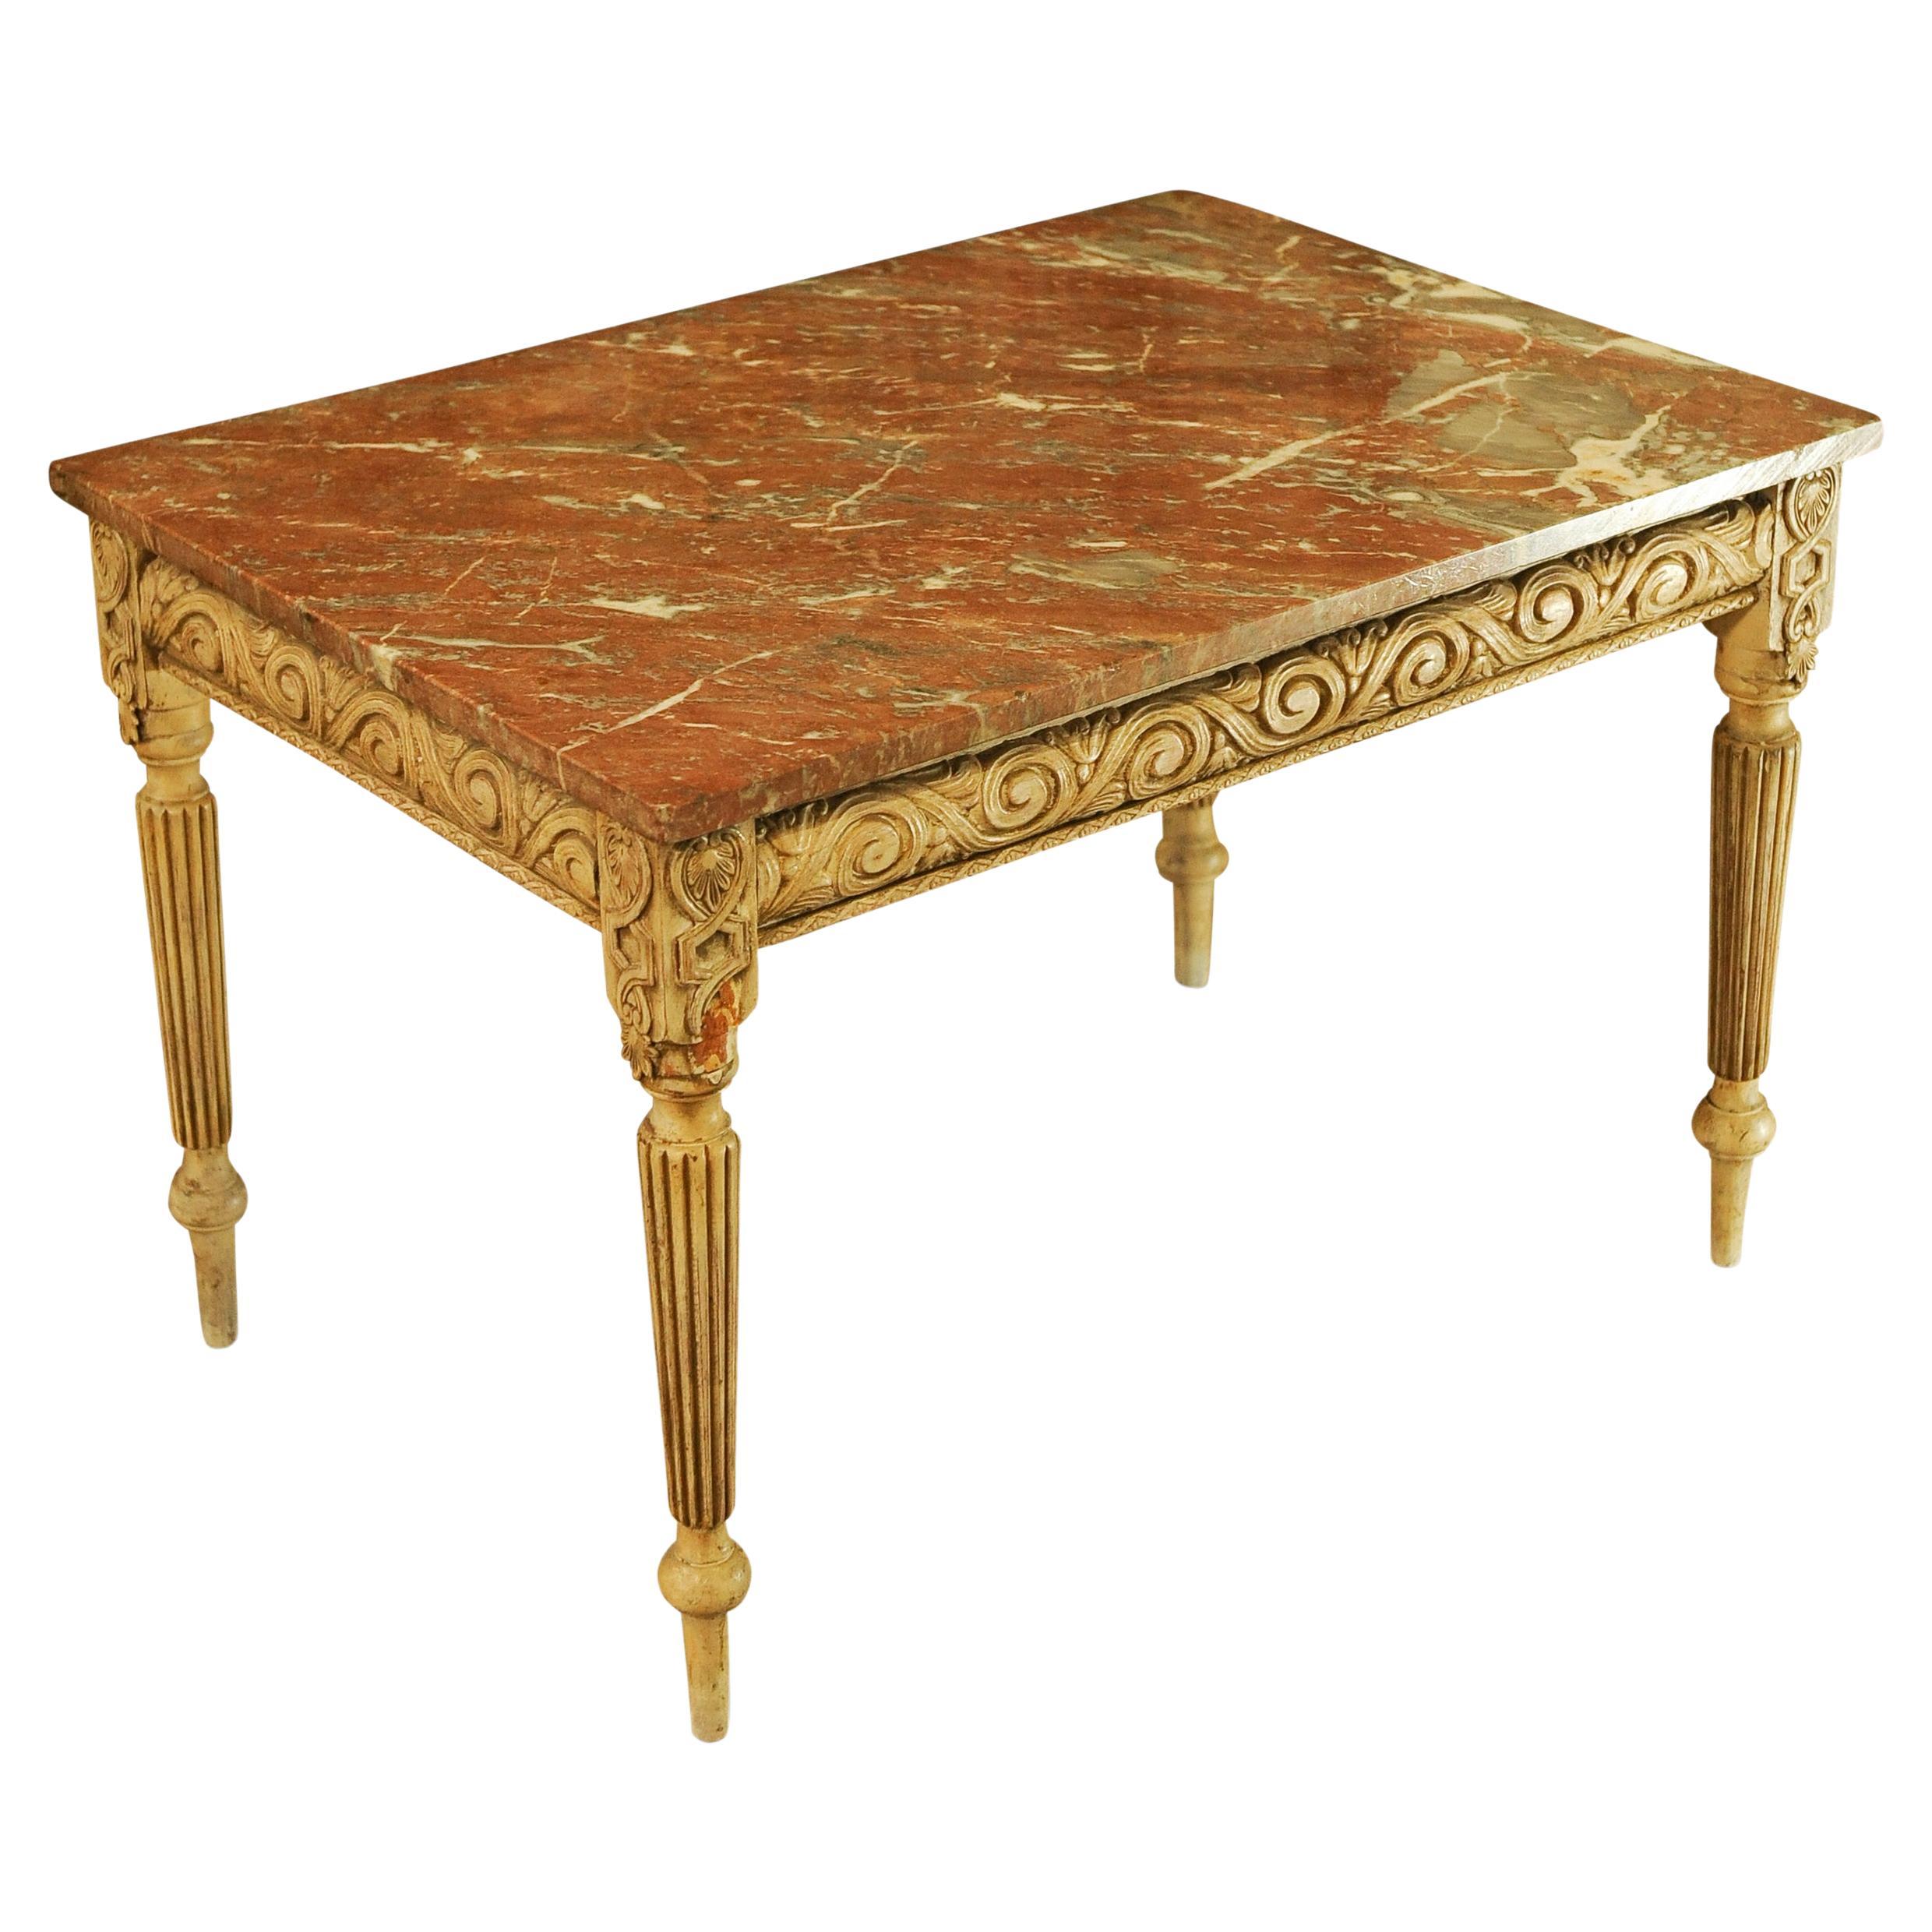 Louis XVI Neoclassical Design Rouge Veined Marble Top Table 1800's For Sale